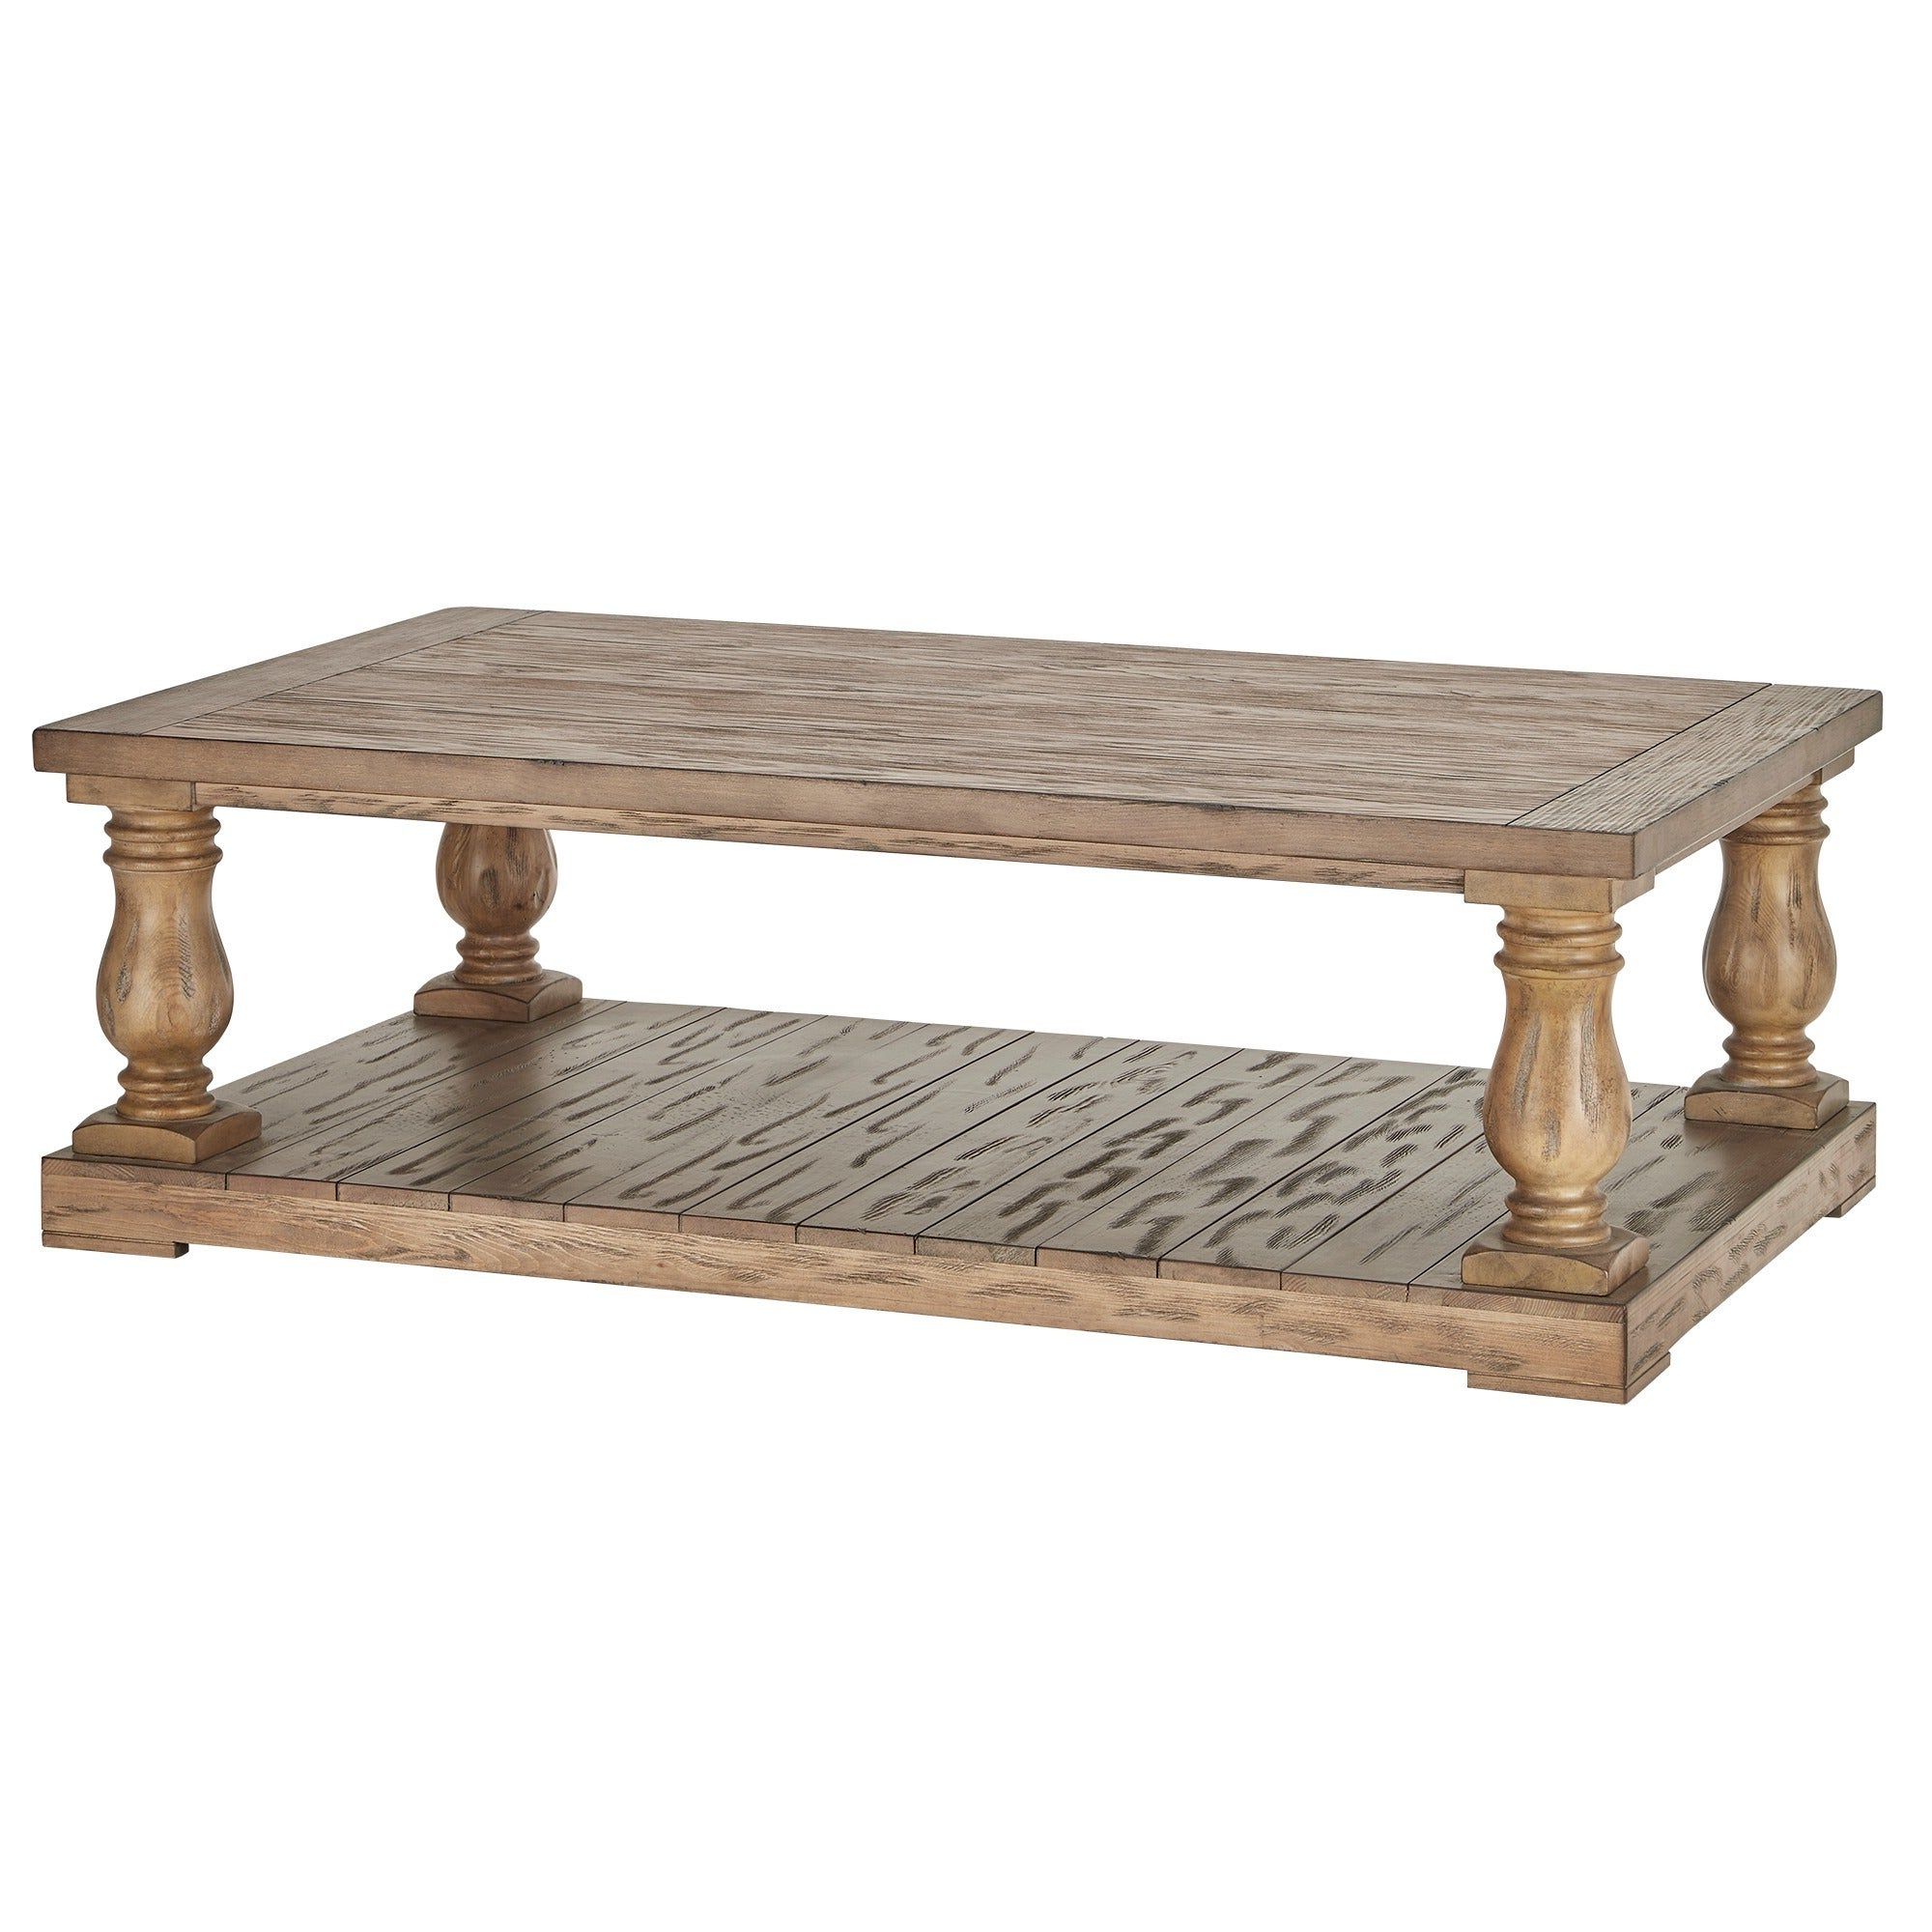 Edmaire Rustic Pine Baluster 55 Inch Coffee Tableinspire Q Artisan Throughout Newest Edmaire Rustic Pine Baluster Coffee Tables (View 2 of 20)